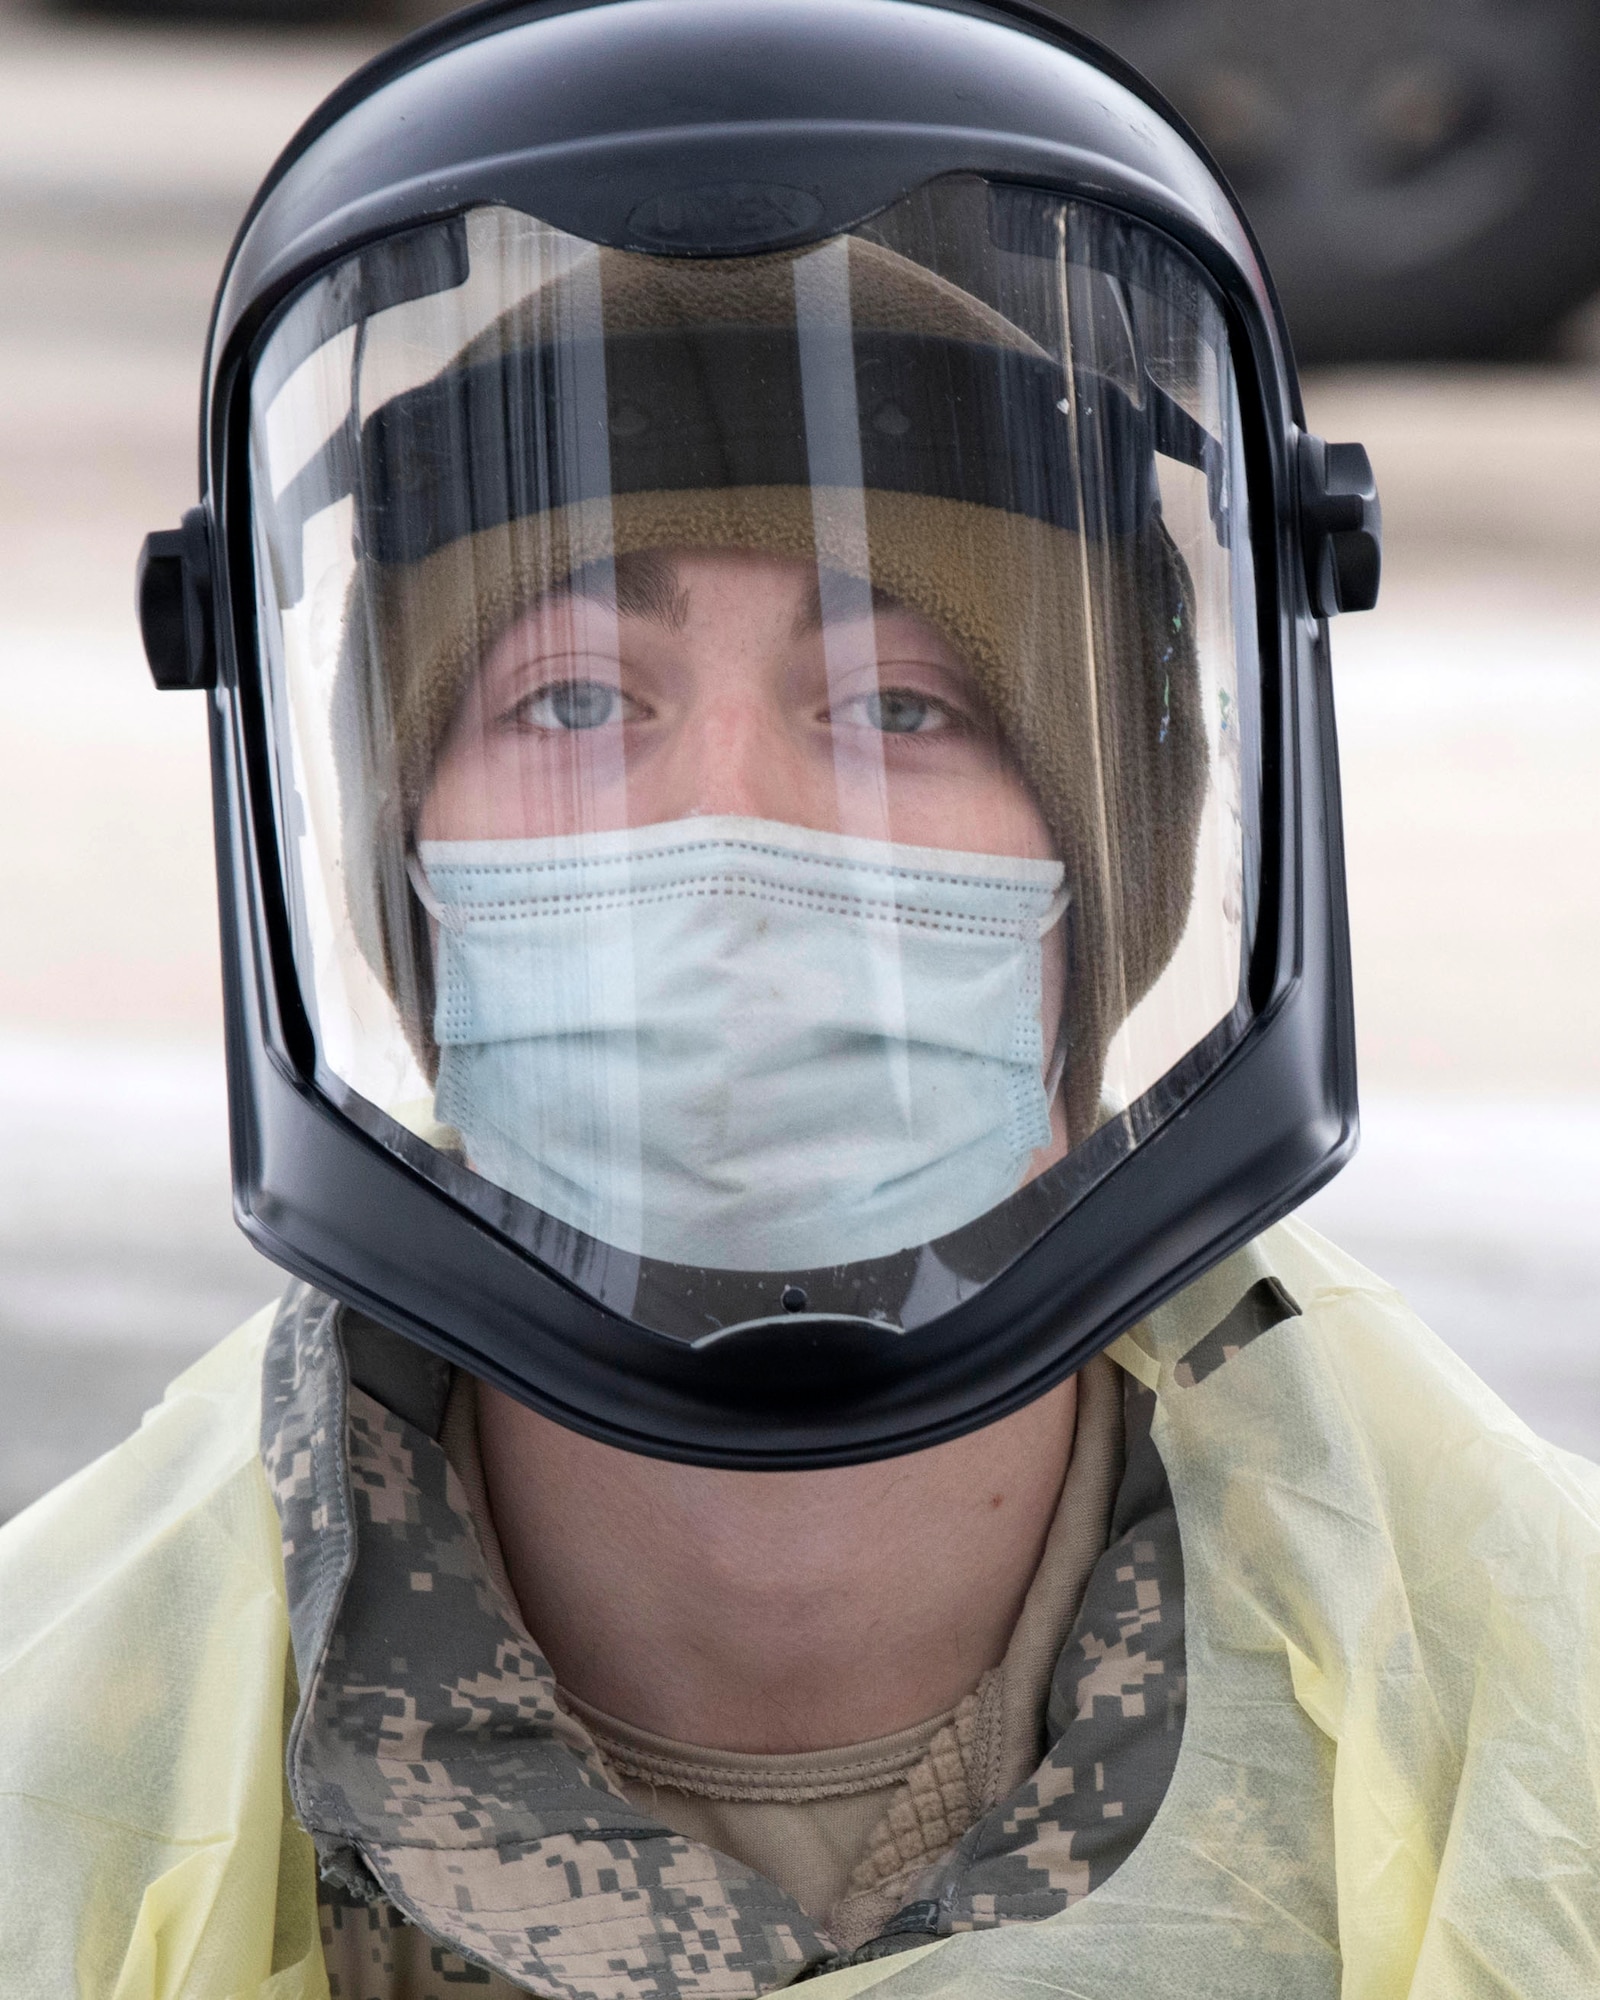 U.S. Army Pvt. Daniel Murtagh, a combat medic specialist assigned to the 1st Squadron, 40th Cavalry Regiment (Airborne), 4th Infantry Brigade Combat Team (Airborne), 25th Infantry Division, U.S. Army Alaska, pauses for a photograph between testing patients for COVID-19 at Joint Base Elmendorf-Richardson, Alaska, Nov. 20, 2020. The 673d MDG stood-up a drive-thru testing clinic to offer a fast, safe way to provide testing to base personnel and their dependents.